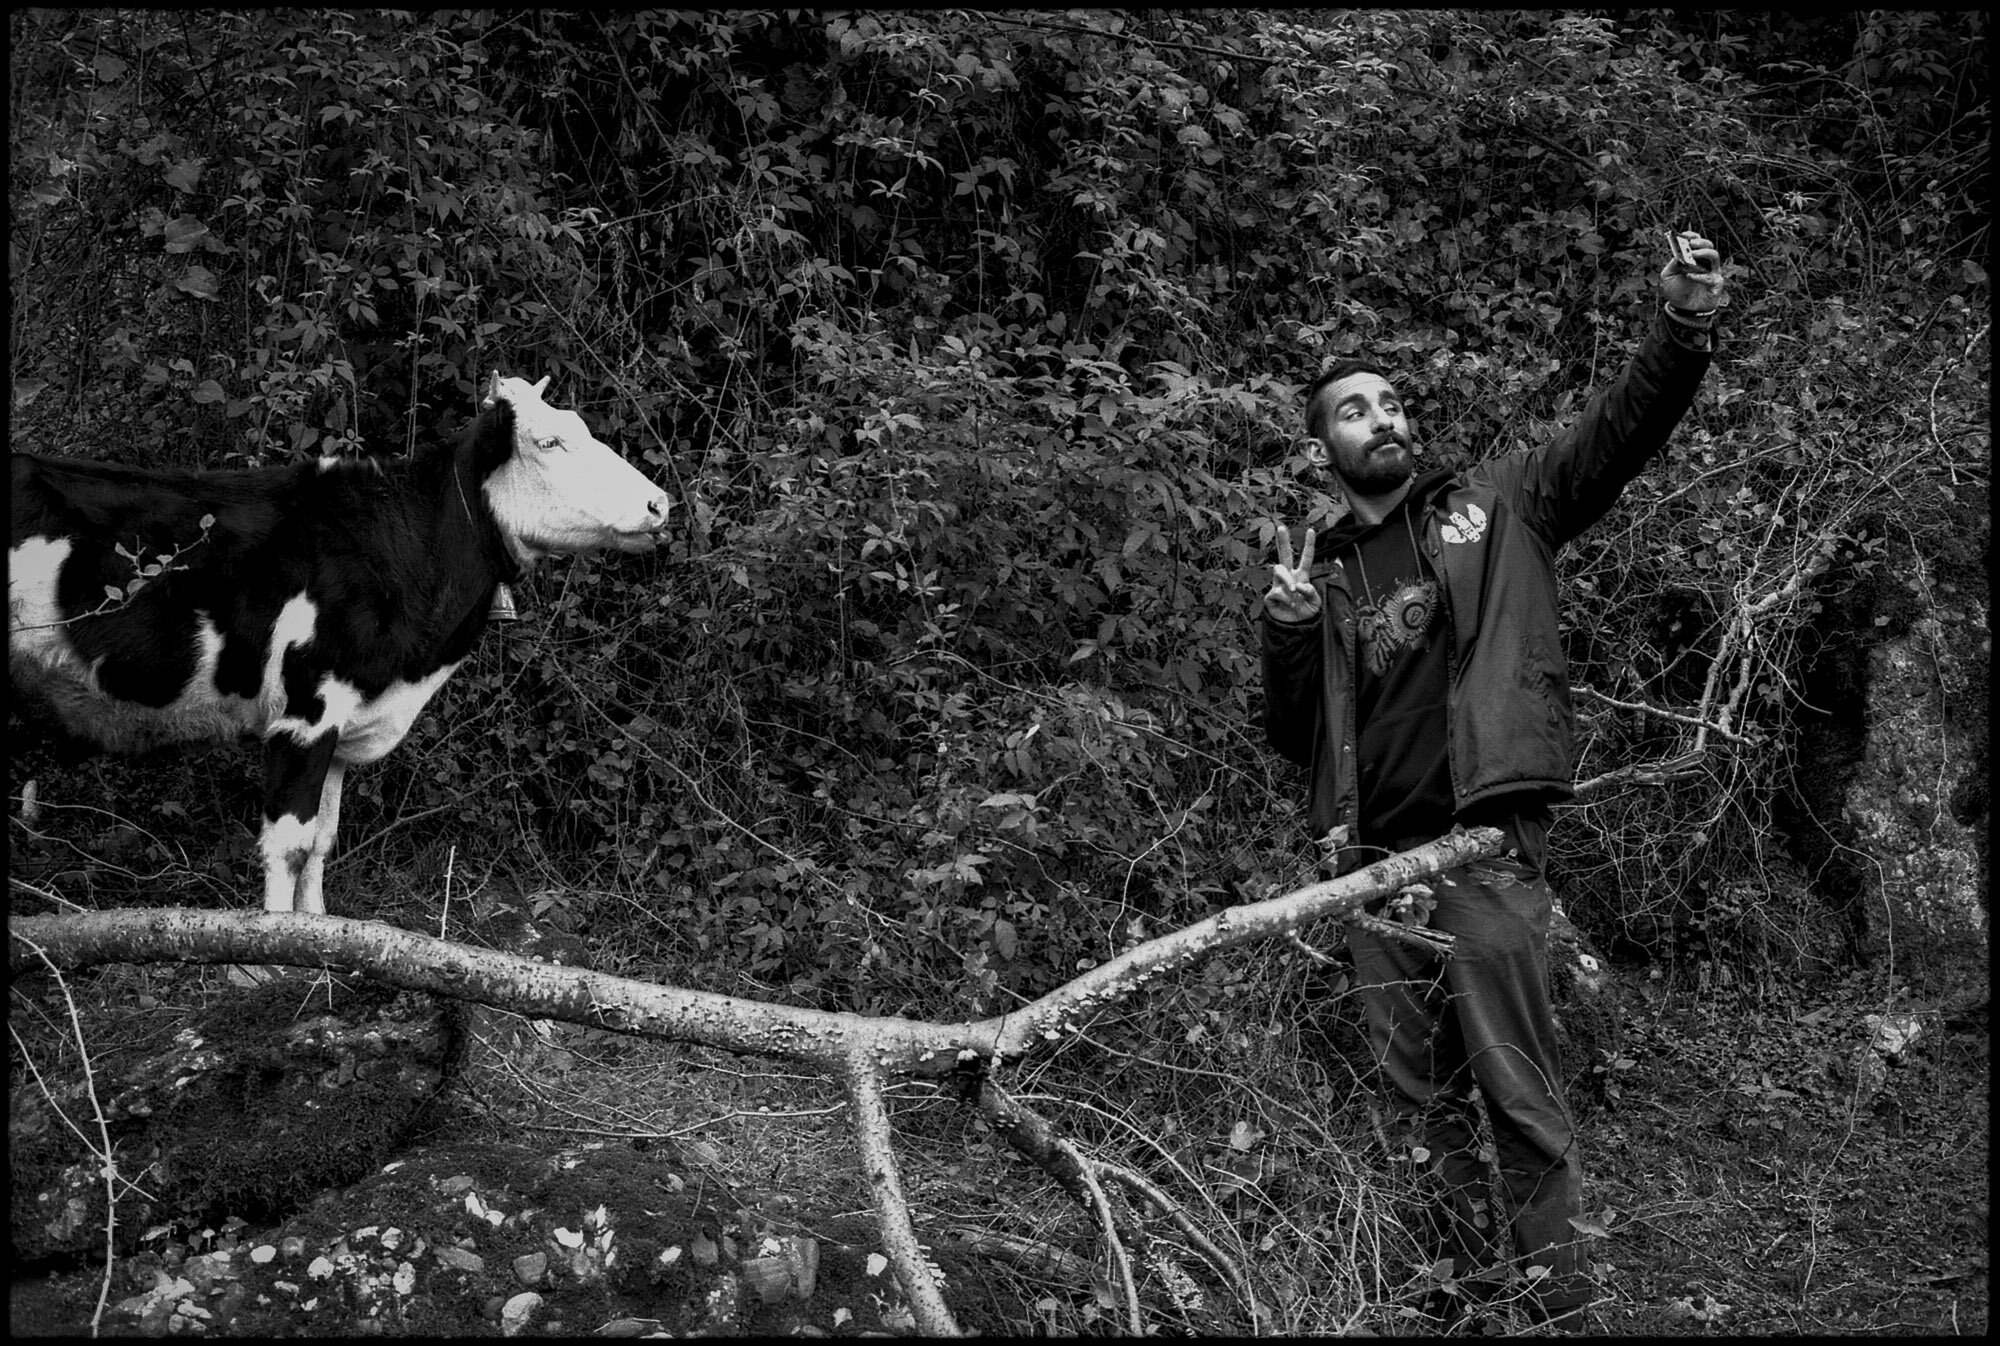  In the forest near Ramsar, Erfan takes a selfie with a cow. Ramsar, Iran, October 18, 2015. 